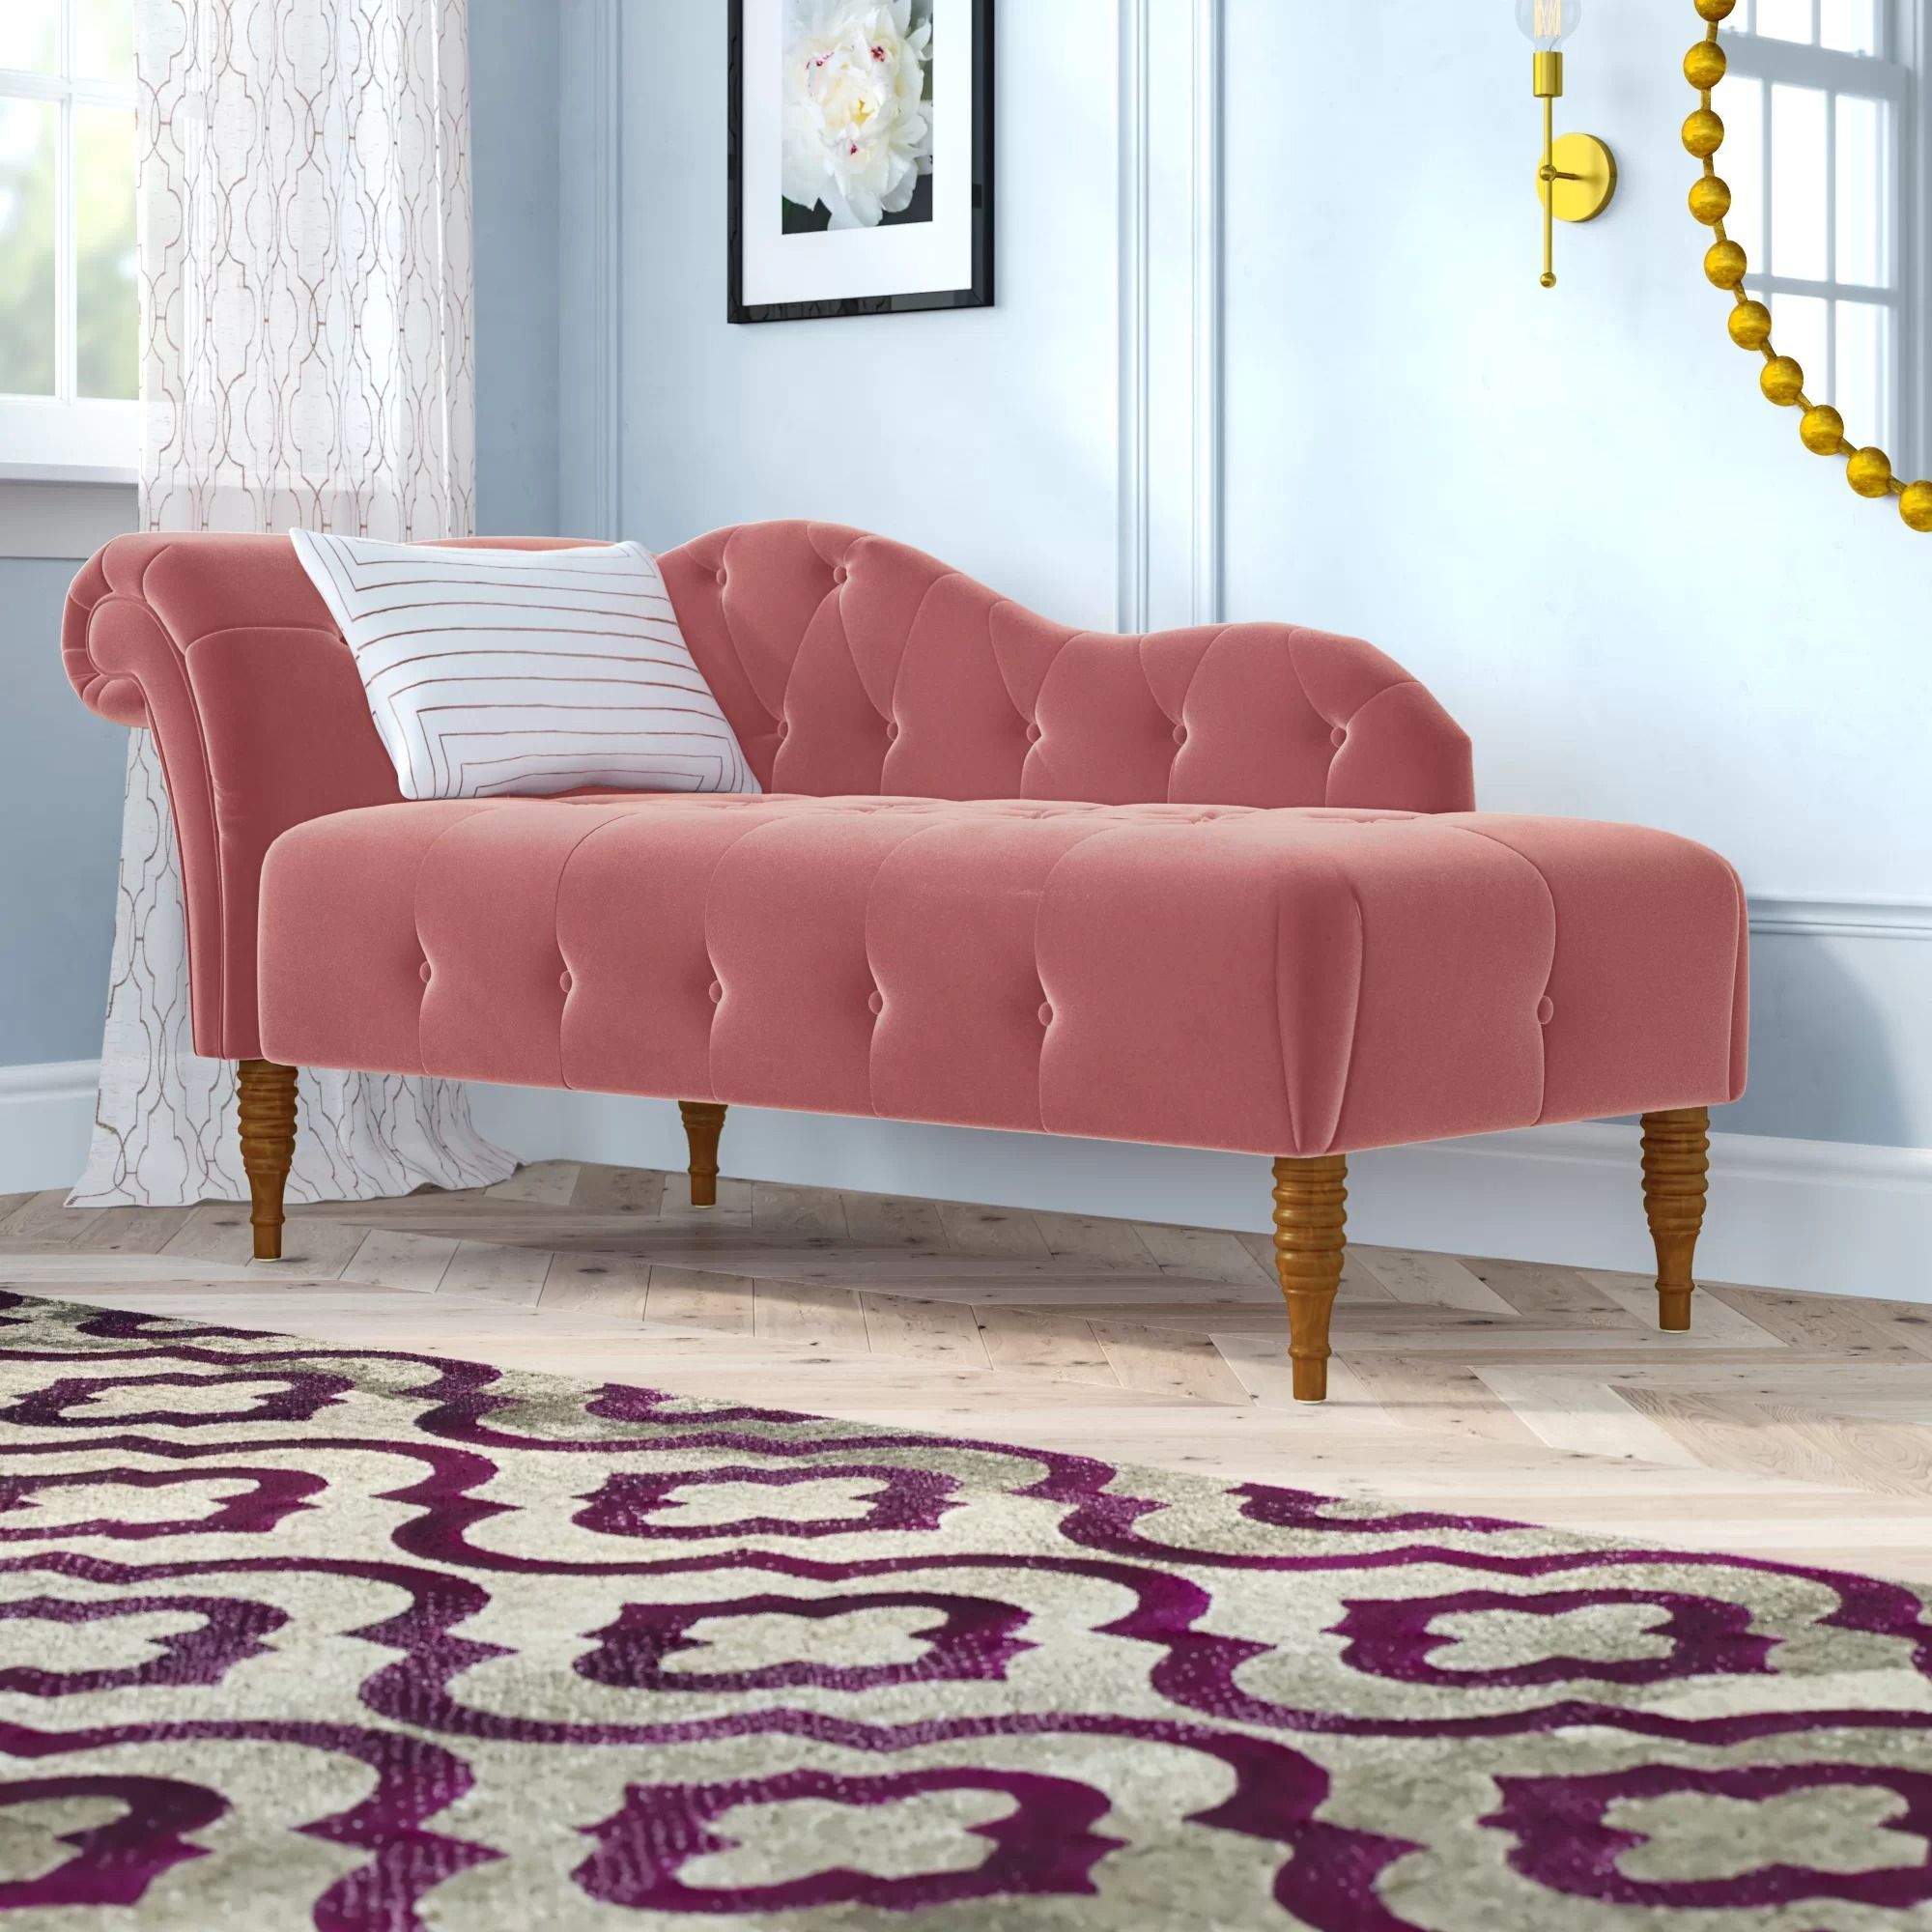 Kannon Tufted Right-Arm Chaise Lounge